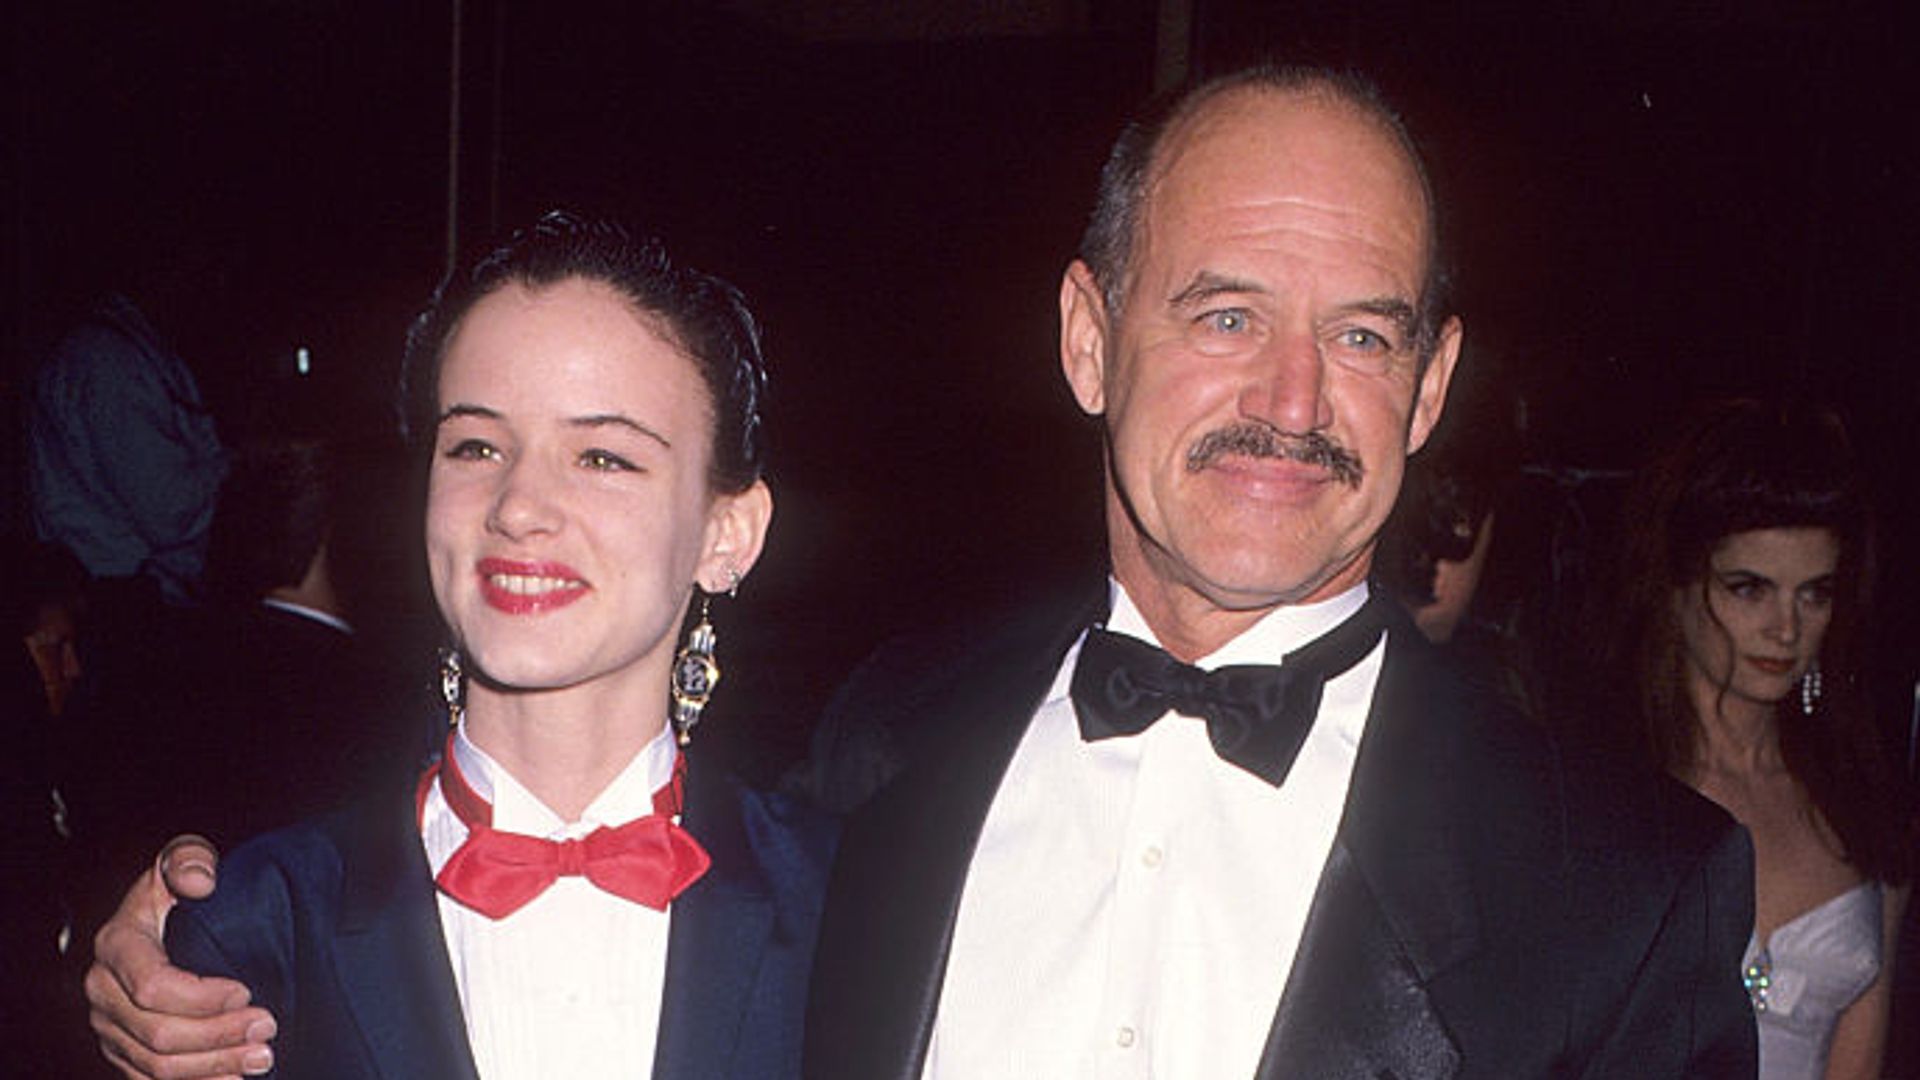 Geoffrey Lewis and Juliet Lewis both wearing suits at a red carpet event in 1992